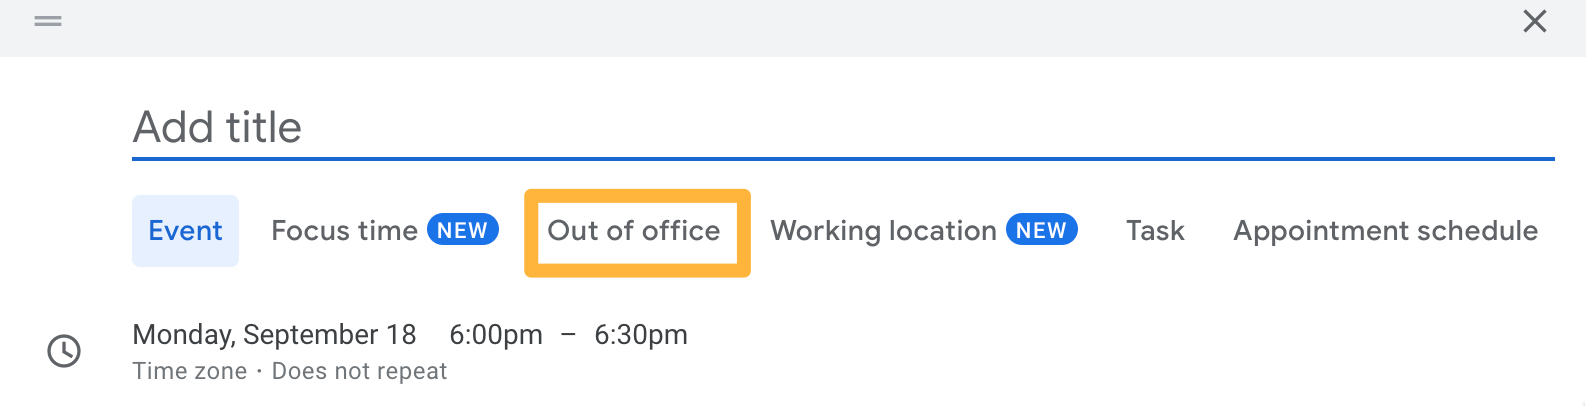 Google calendar scheduling window with an orange box around the option Out of office